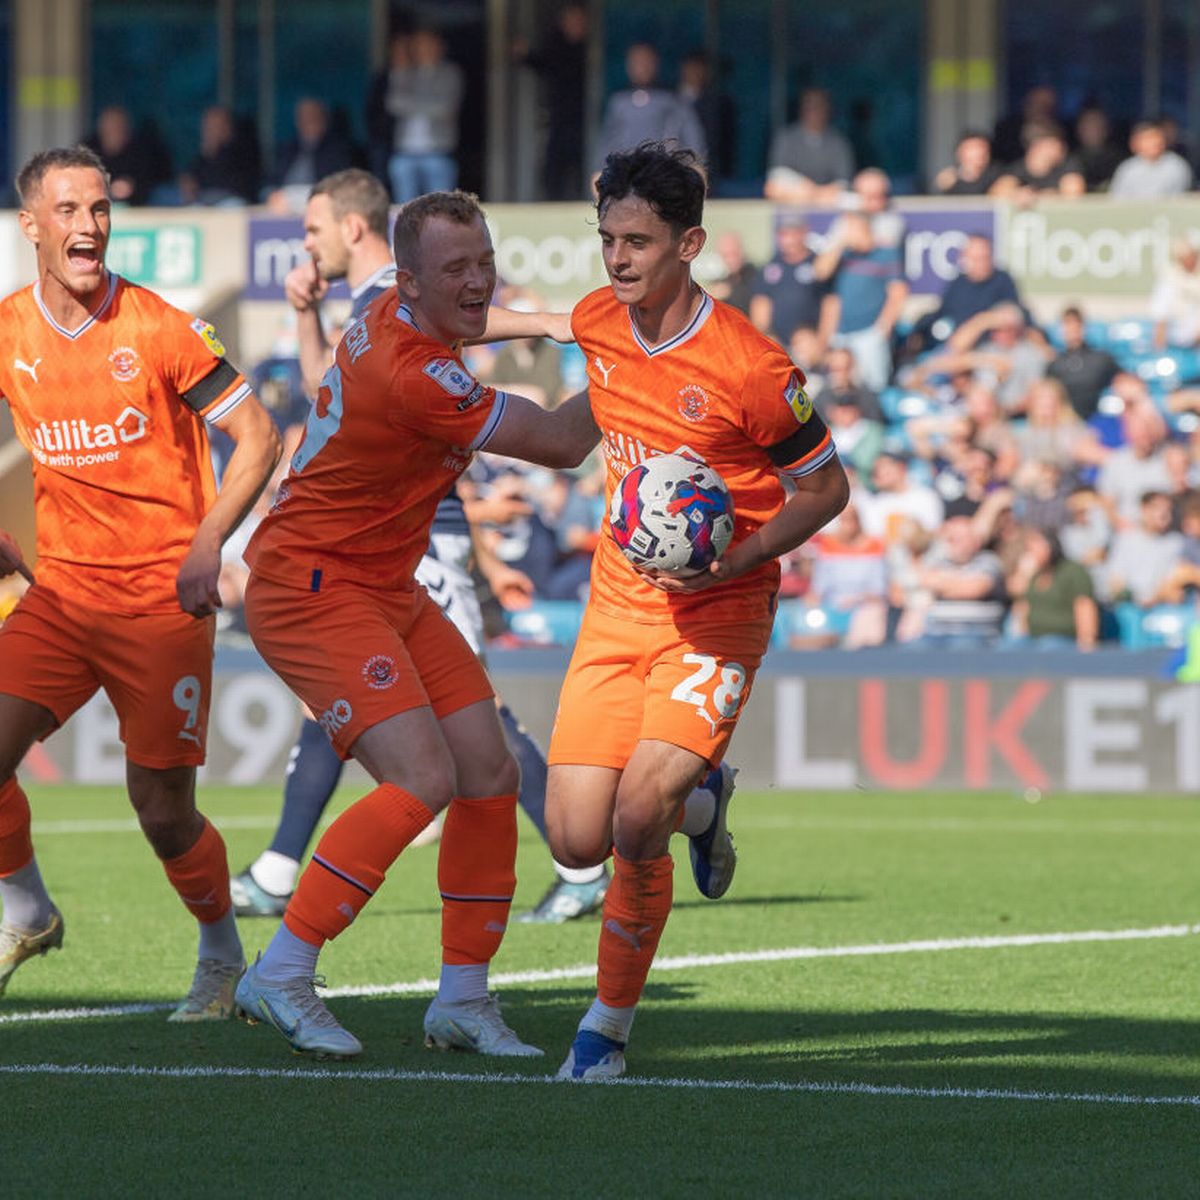 Video: Arsenal’s Charlie Patino scores his 1st goal for Blackpool